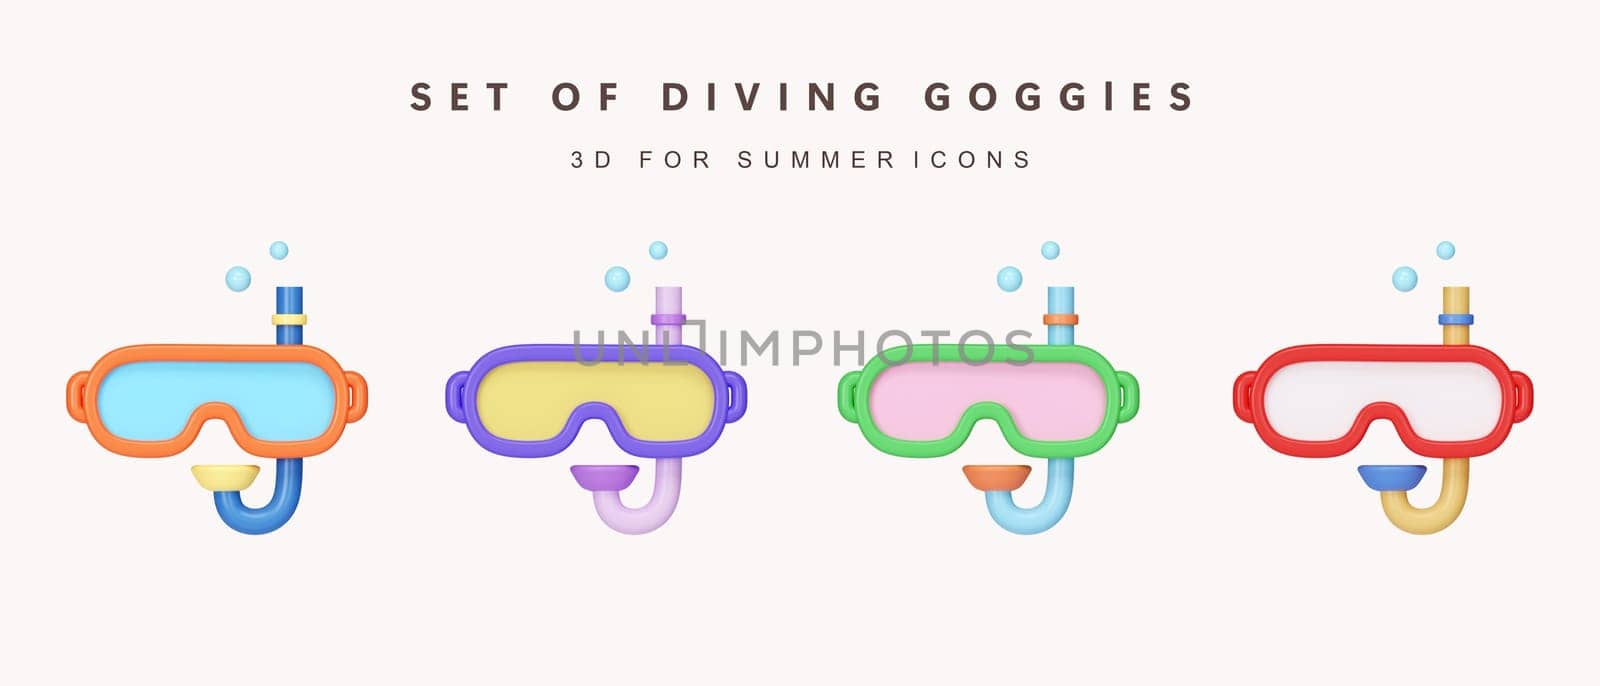 3d Set of color diving goggle icon for summer vacation concept. icon isolated on white background. 3d rendering illustration. Clipping path. by meepiangraphic